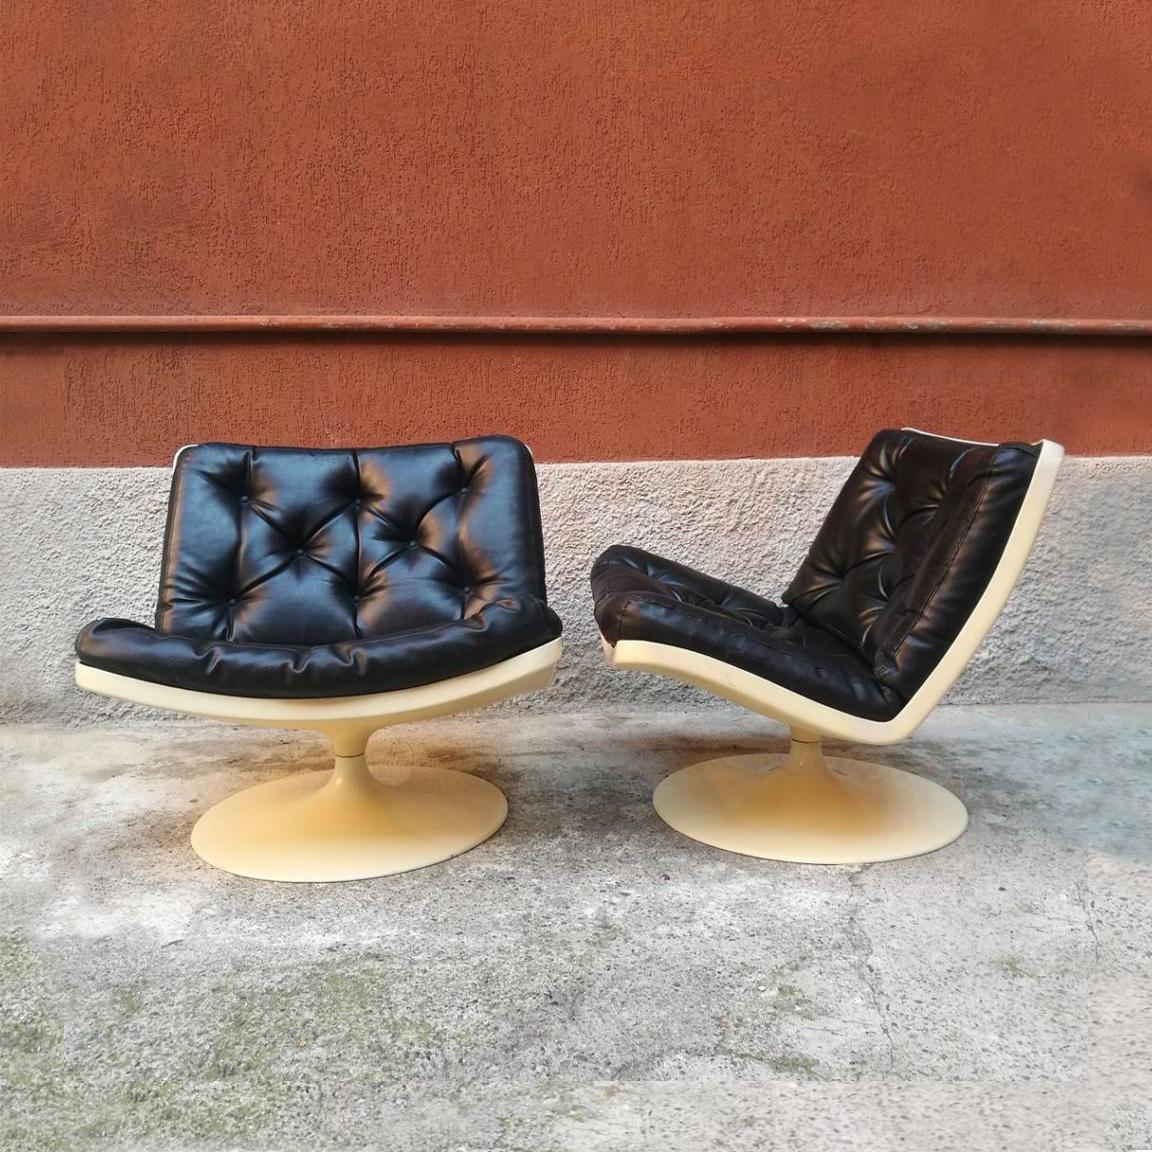 Italian Space Age Plastic and Leather Tulip Armchairs by Knoll/Play, 1970s
Space Age armchair with white plastic shell, original black leather pillow and Tulip base, made by Knoll/Play.
Very good conditions.
Measures: 69 x 60 x 63 H cm.